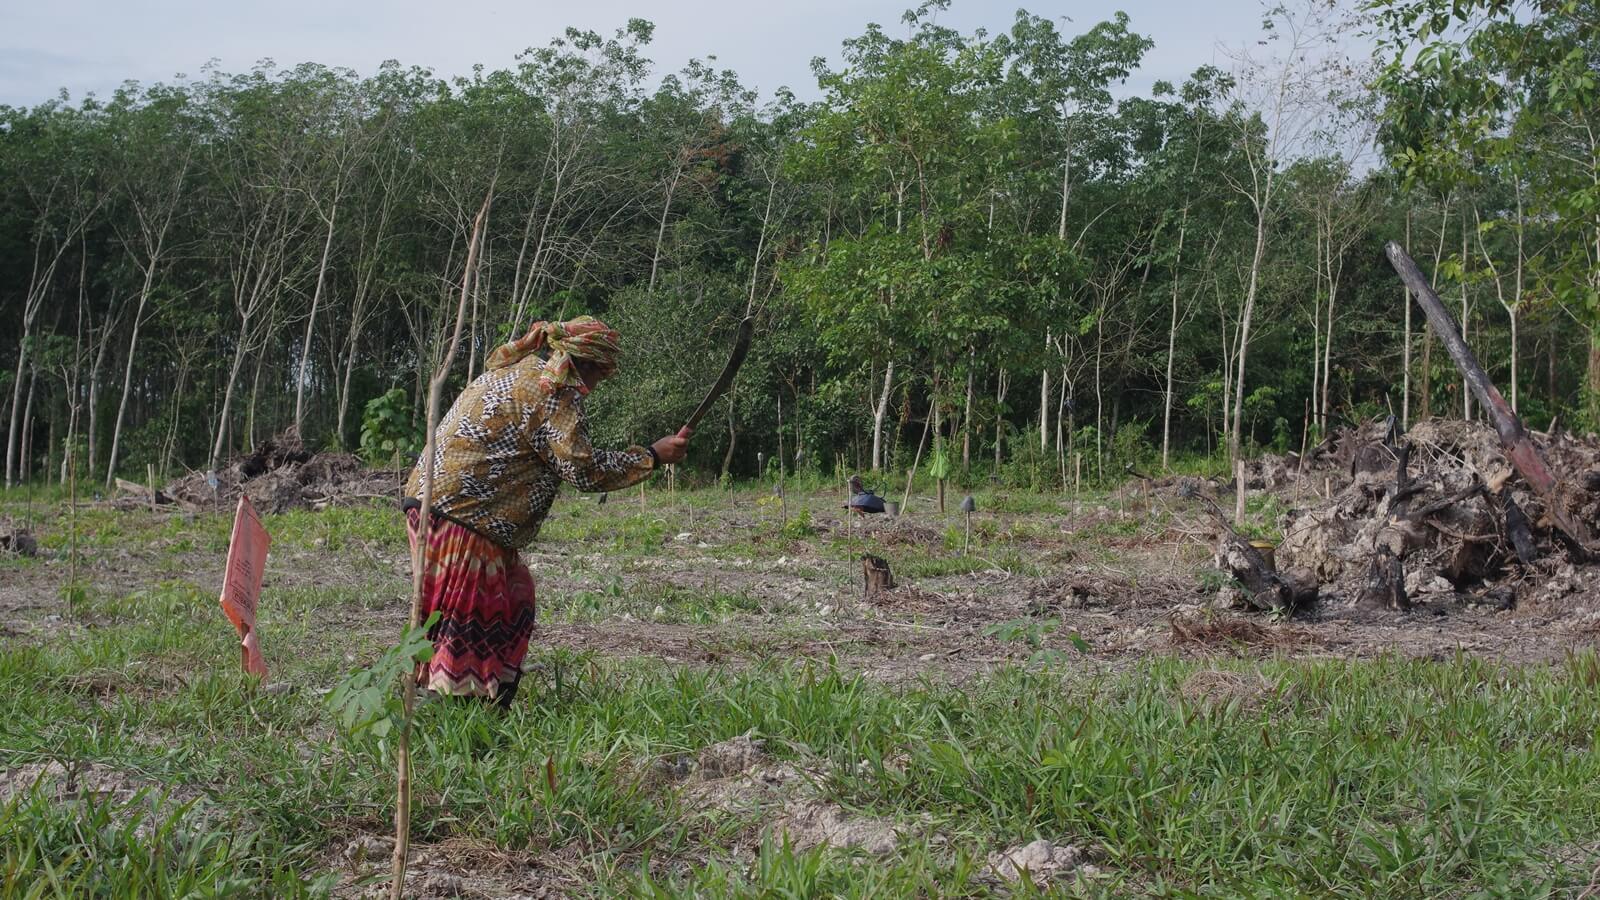 Most families in Kampung Labong own or manage several acres of rubber trees. Here a villager is weeding a plot which she has just inherited from her father. (YH Law)